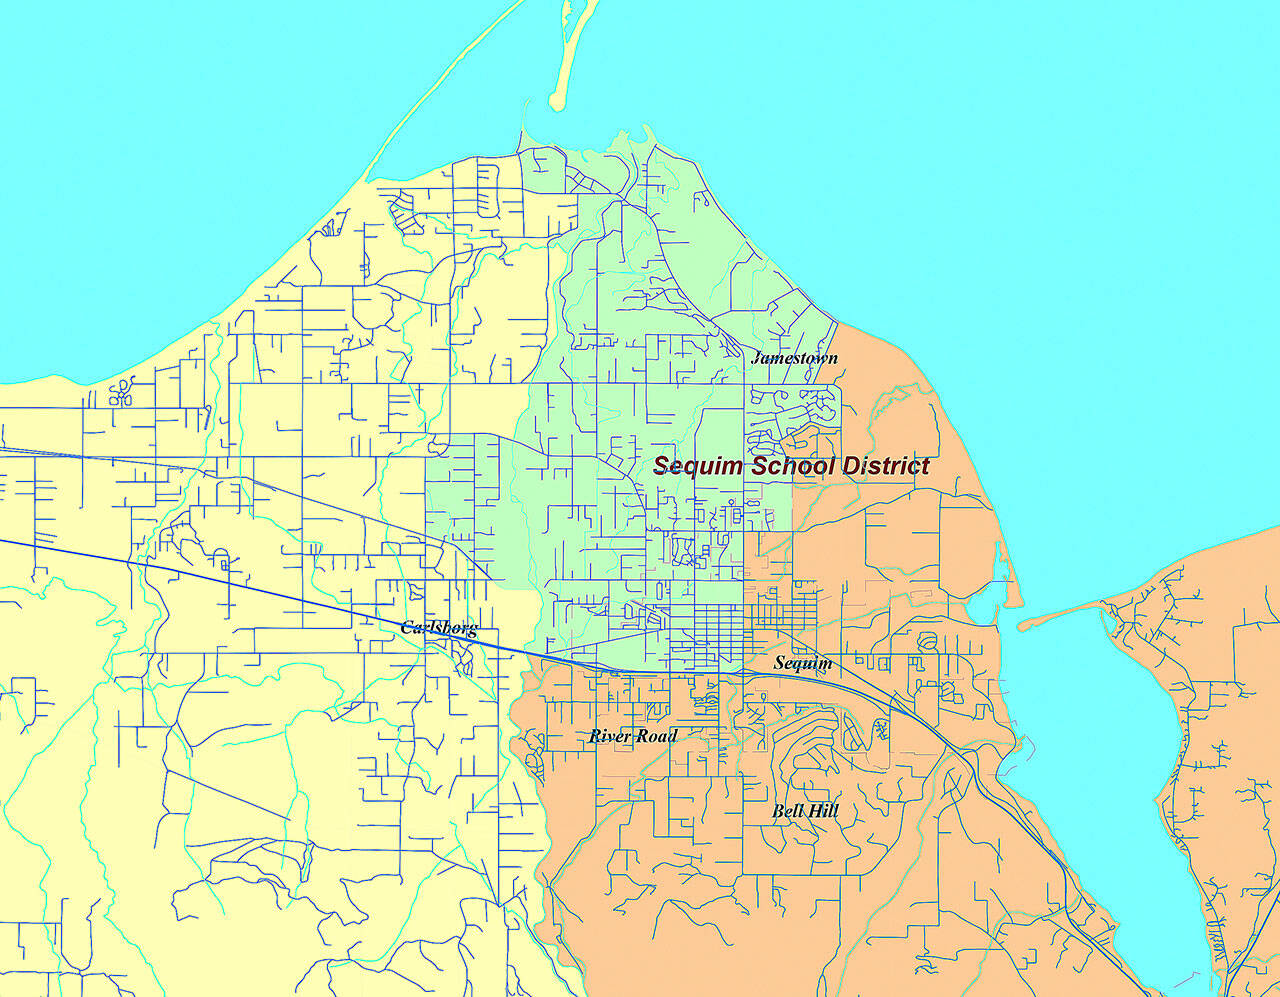 A map of current Sequim School District director boundaries shows District 1 to the west (left) in yellow, District 2 to the north (green) and District 3 to the south and east (orange). Population growth in the district since 2010, as noted in the 2020 Census, means District 3 will likely shrink slightly while the other two Districts will grow. Map courtesy of Sequim School District